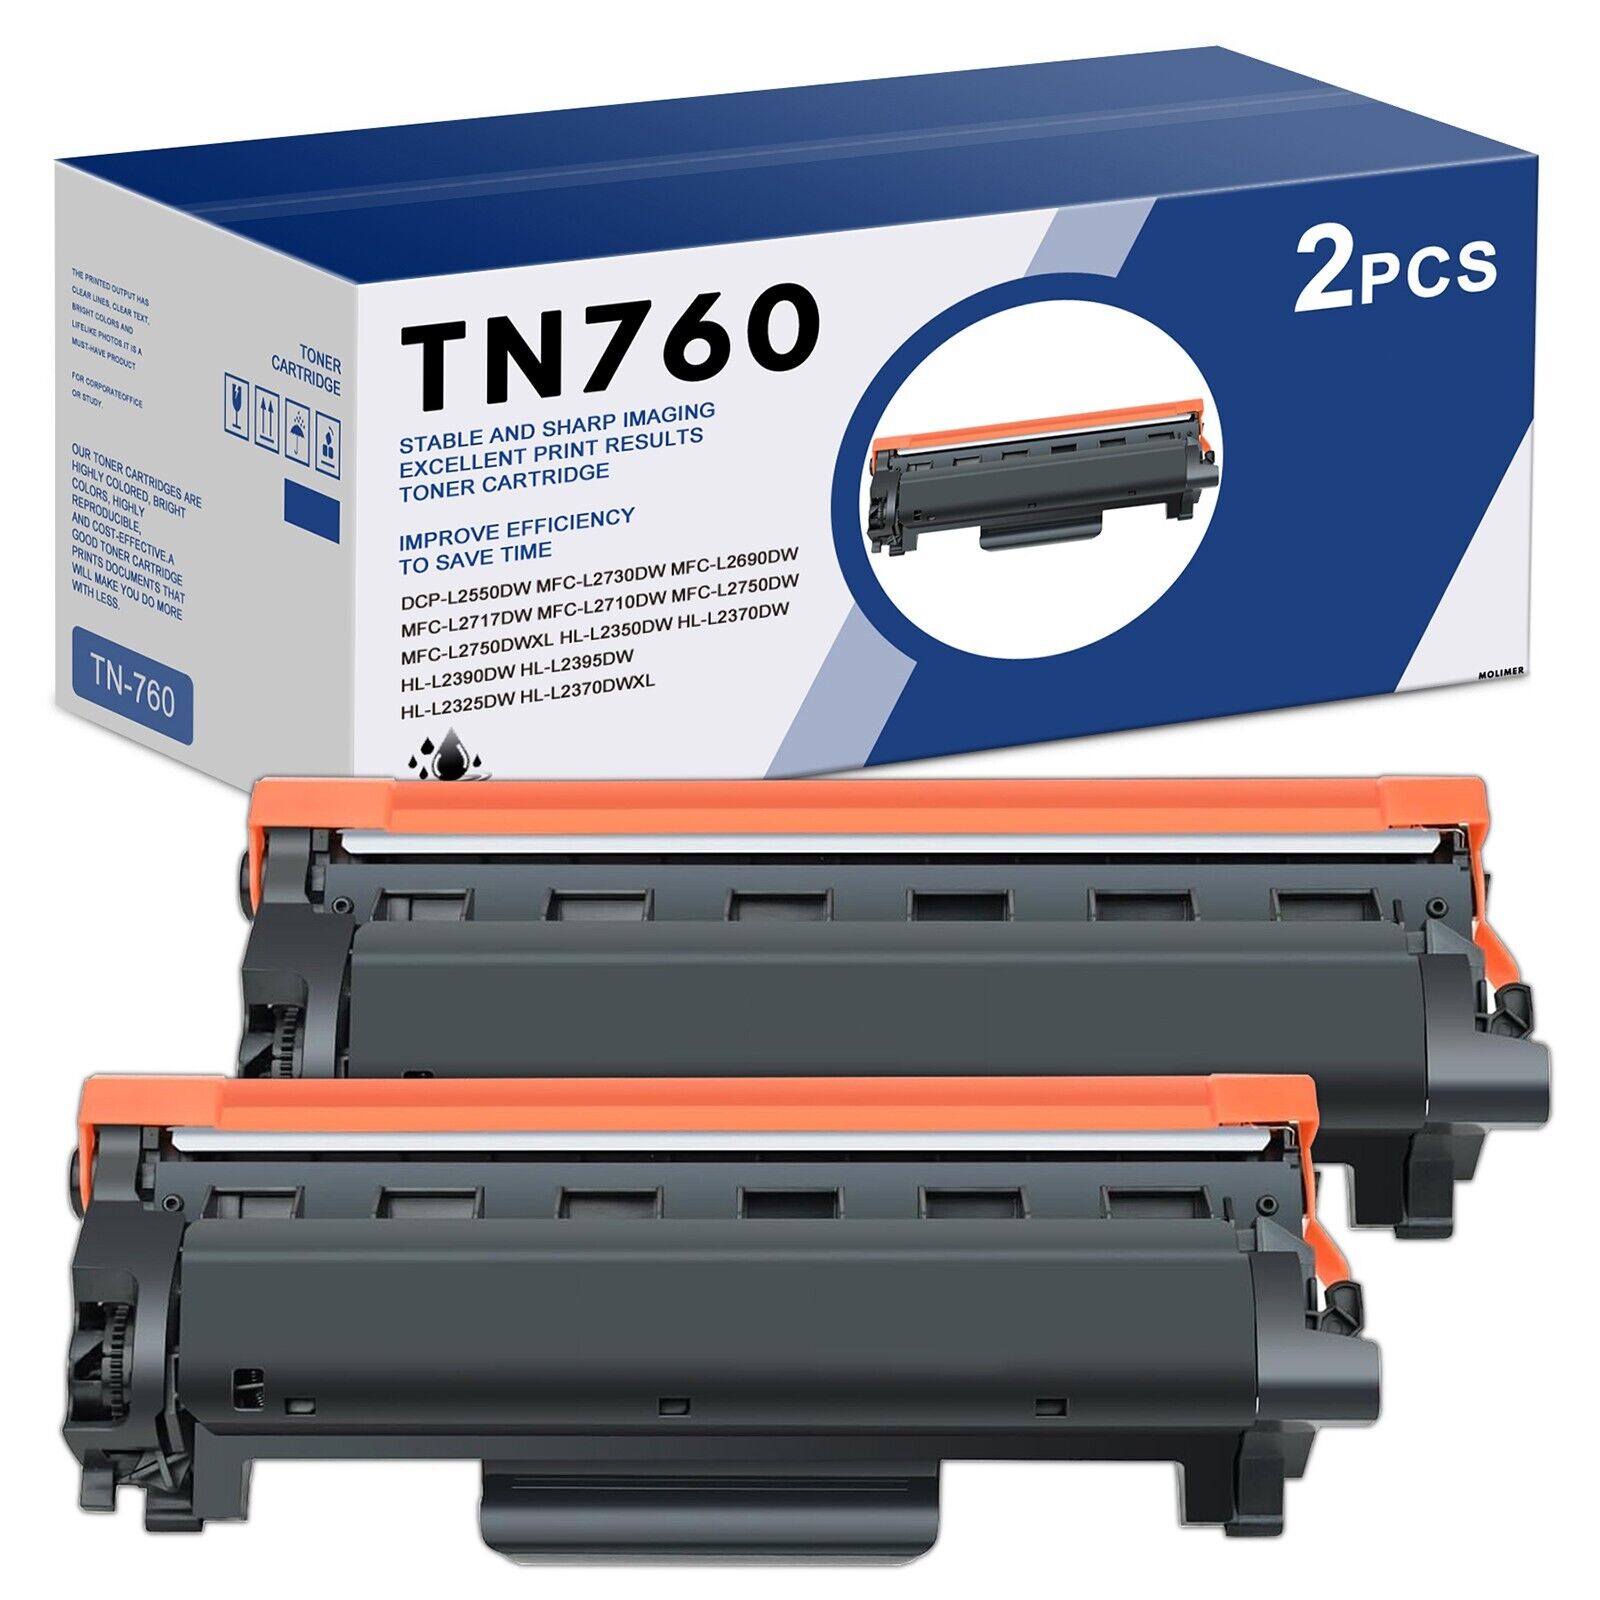 2PK TN760 High Yield Toner Cartridge Replacement for Brother MFC-L2717DW Printer